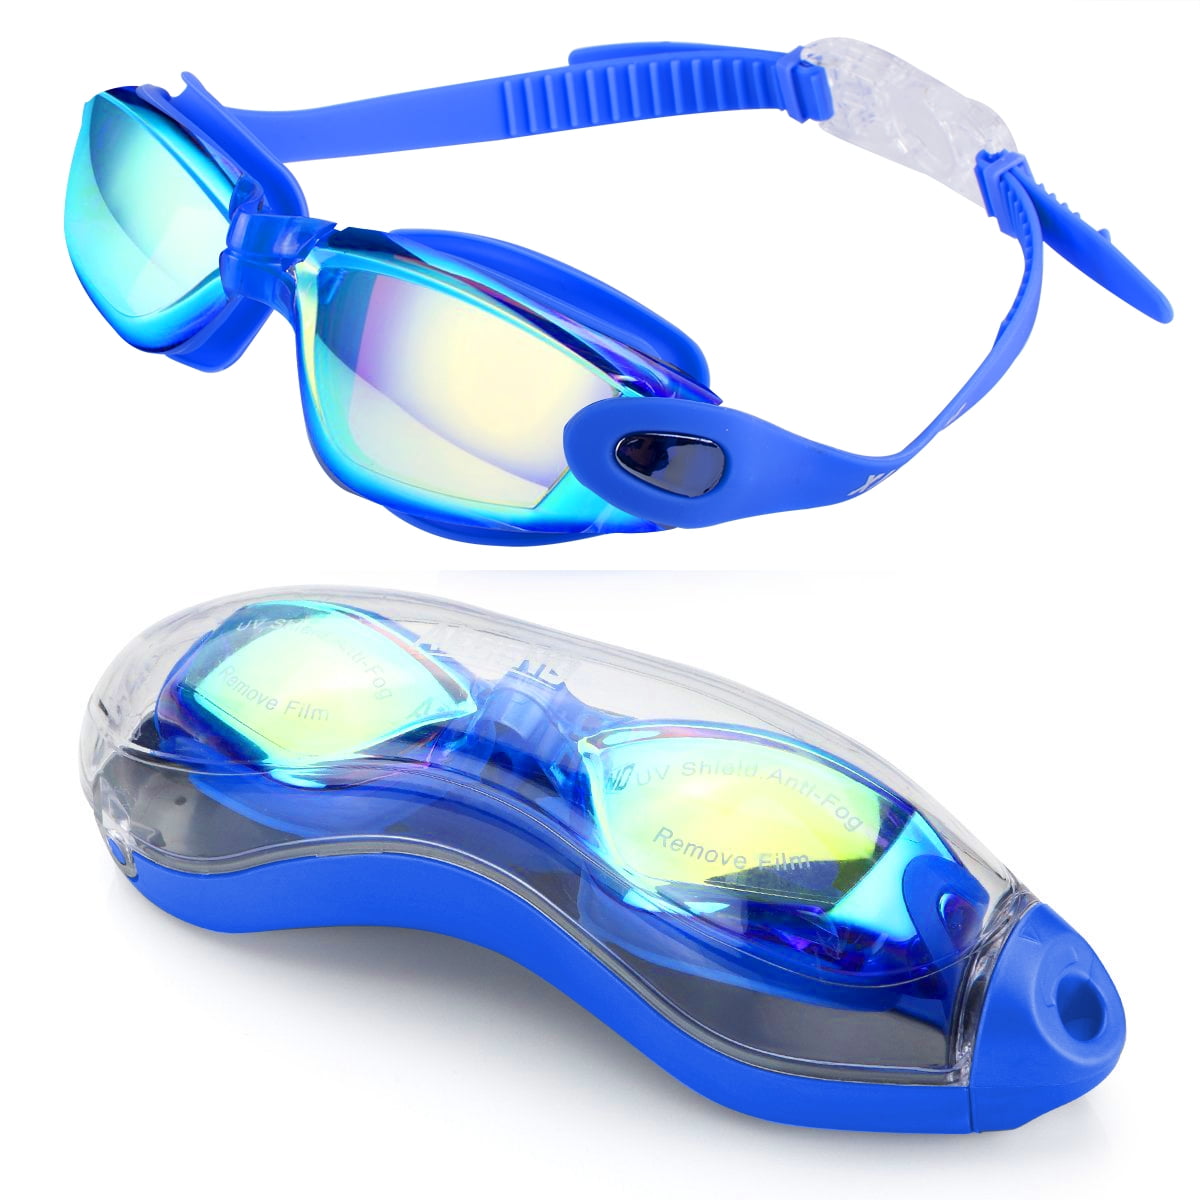 ABSOLUTELY NO LEAKING Anti-Fog & UV Protection Swim Goggles Free Protection Case 